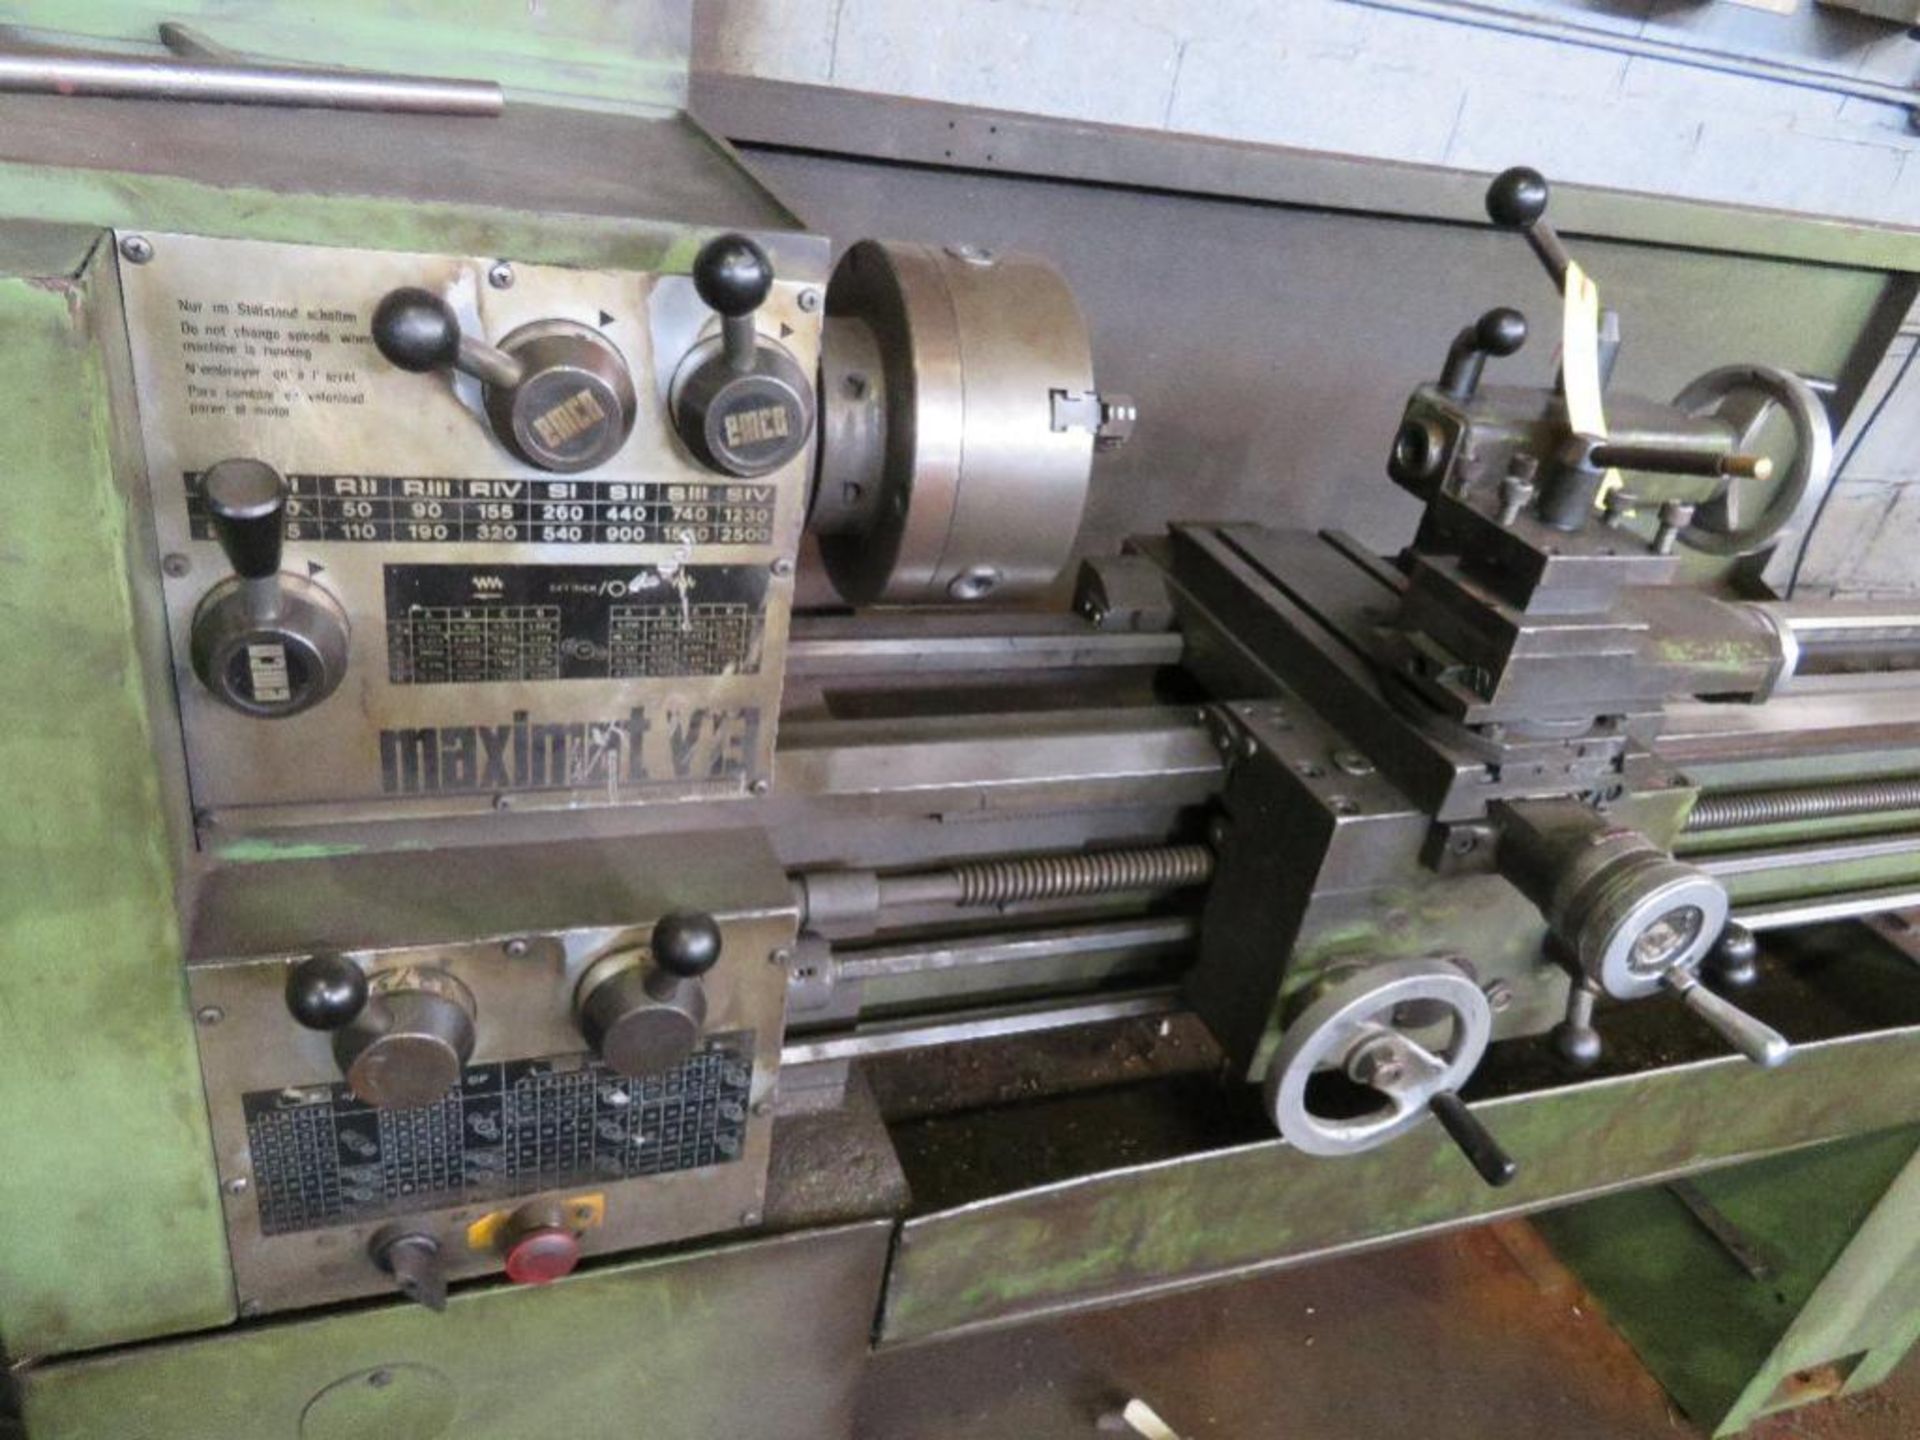 Emco 13 in. x 42 in. Geared Head Engine Lathe Model Maximet V13, S/N D2P8501013, 8 in. 3-Jaw Chuck, - Image 2 of 2